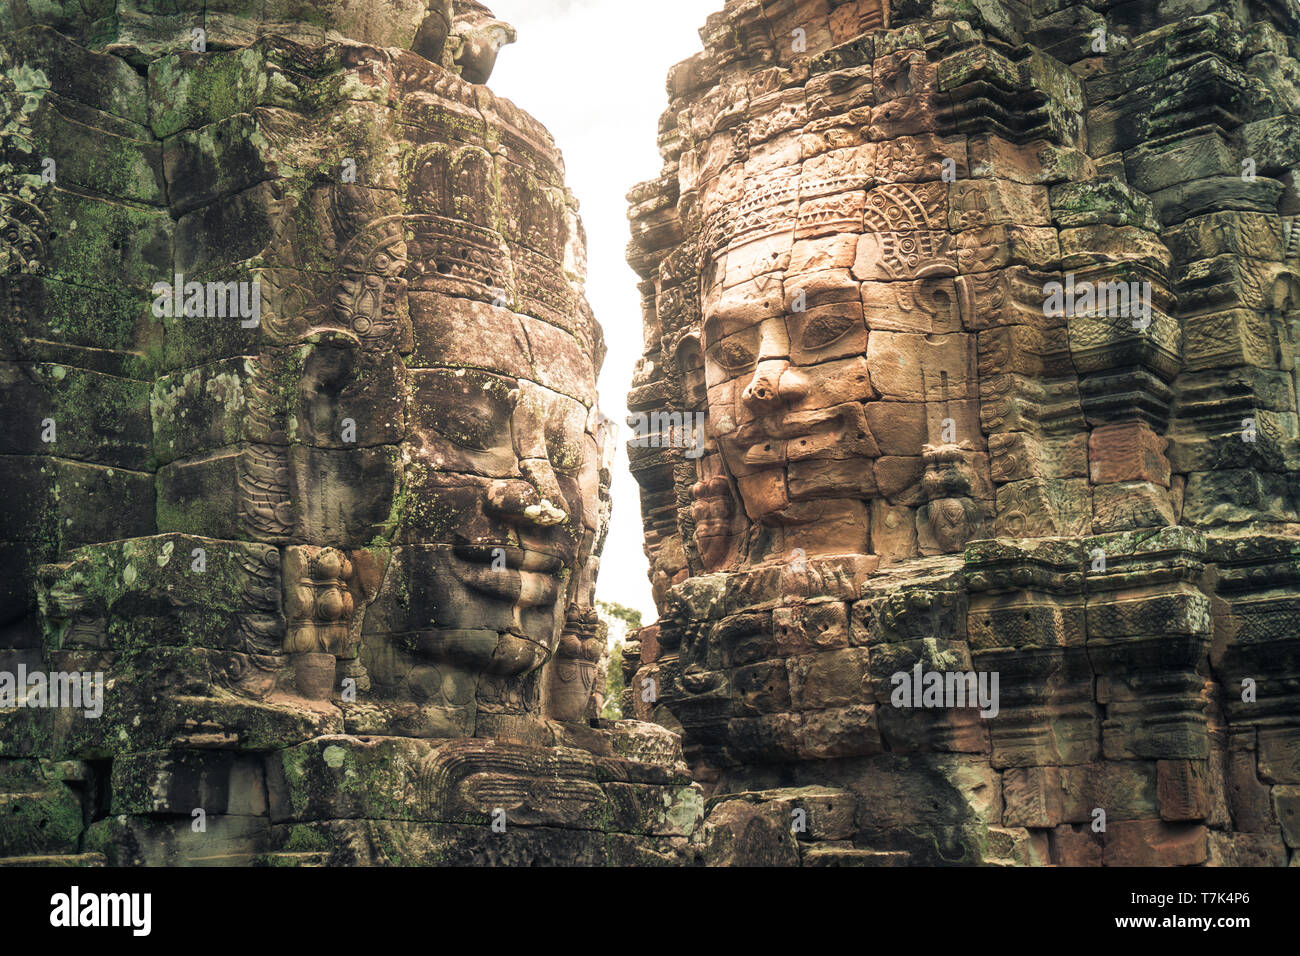 Faces carved in stone at Angkor, Cambodia Stock Photo